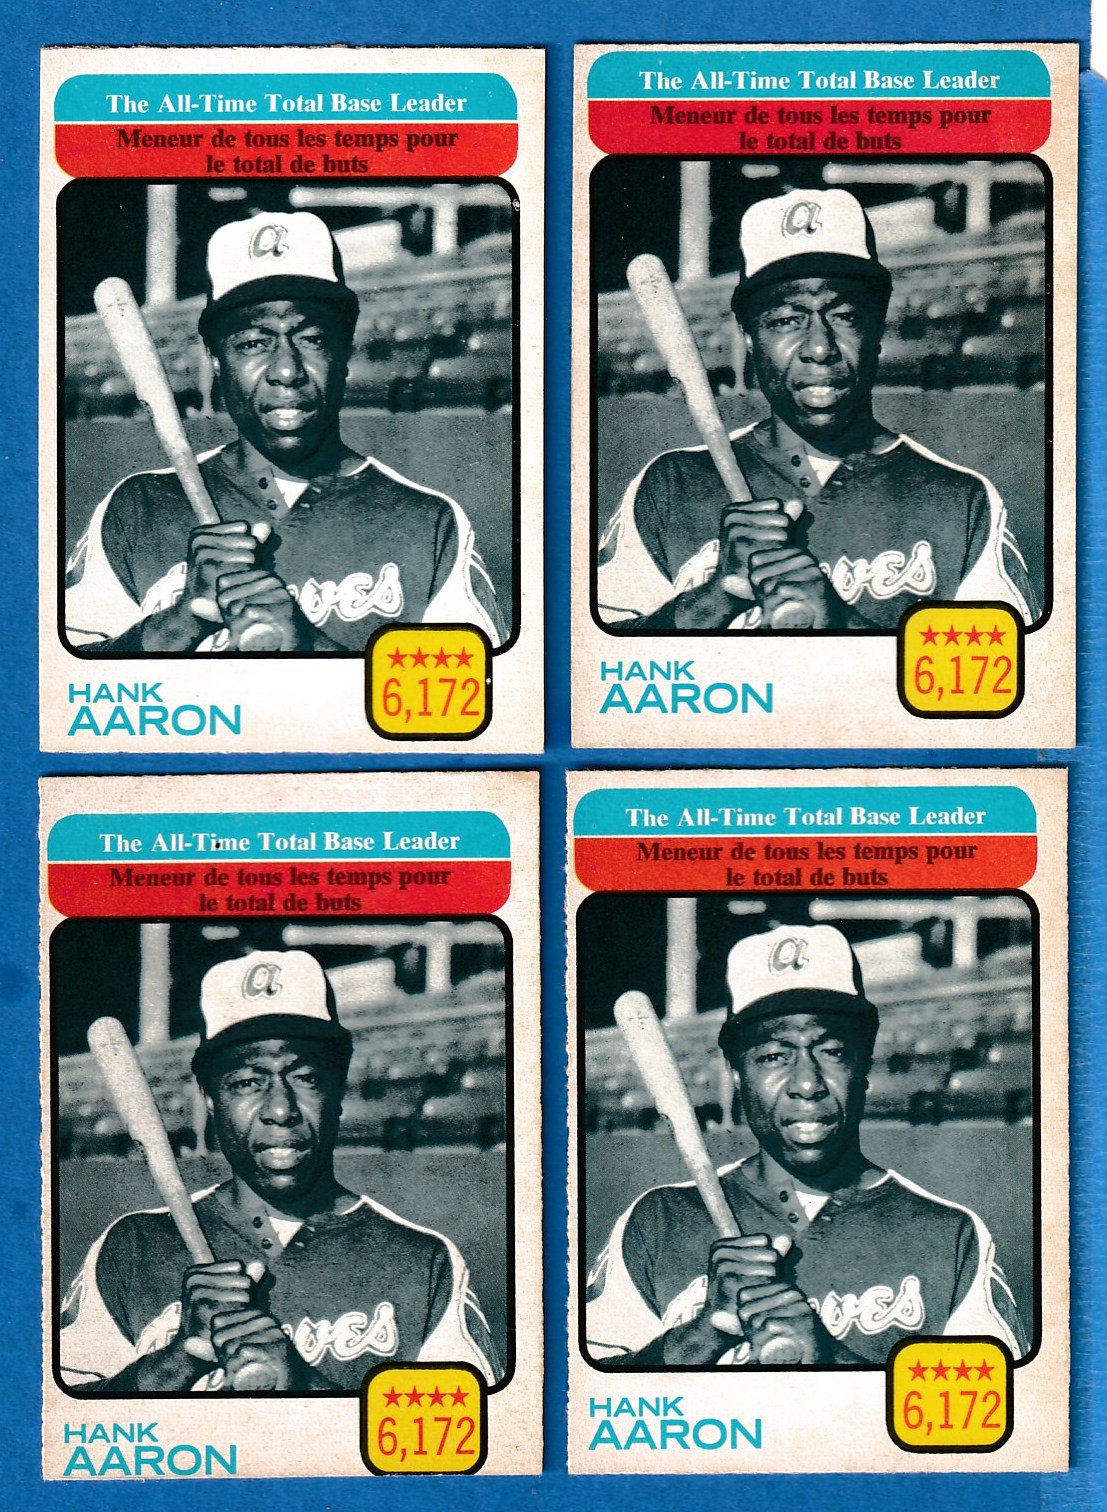 1973 O-Pee-Chee/OPC #473 Hank Aaron All-Time Leaders (6,172 Total Bases) (B Baseball cards value